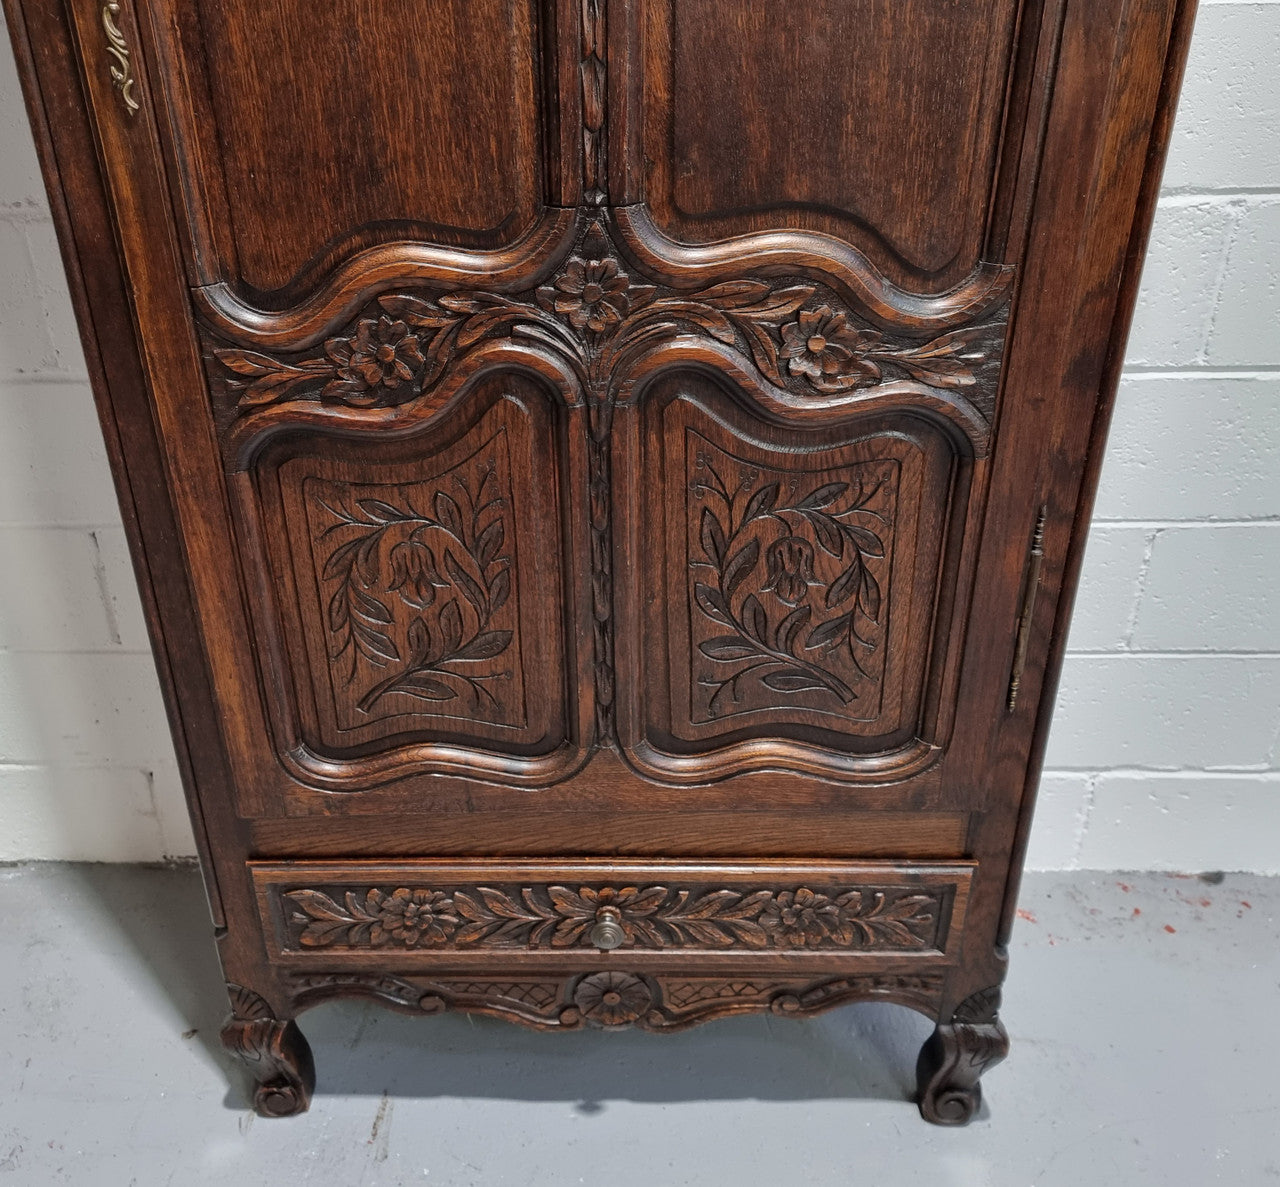 An Attractive French Louis XV style single-door ‘Marriage Armoire’. Beautifully arched crest with detailed carved flowers along with an arched single door which repeats the floral carvings. It is also has plenty of storage space with three adjustable shelves along with a drawer at the bottom. All in good original detailed condition.